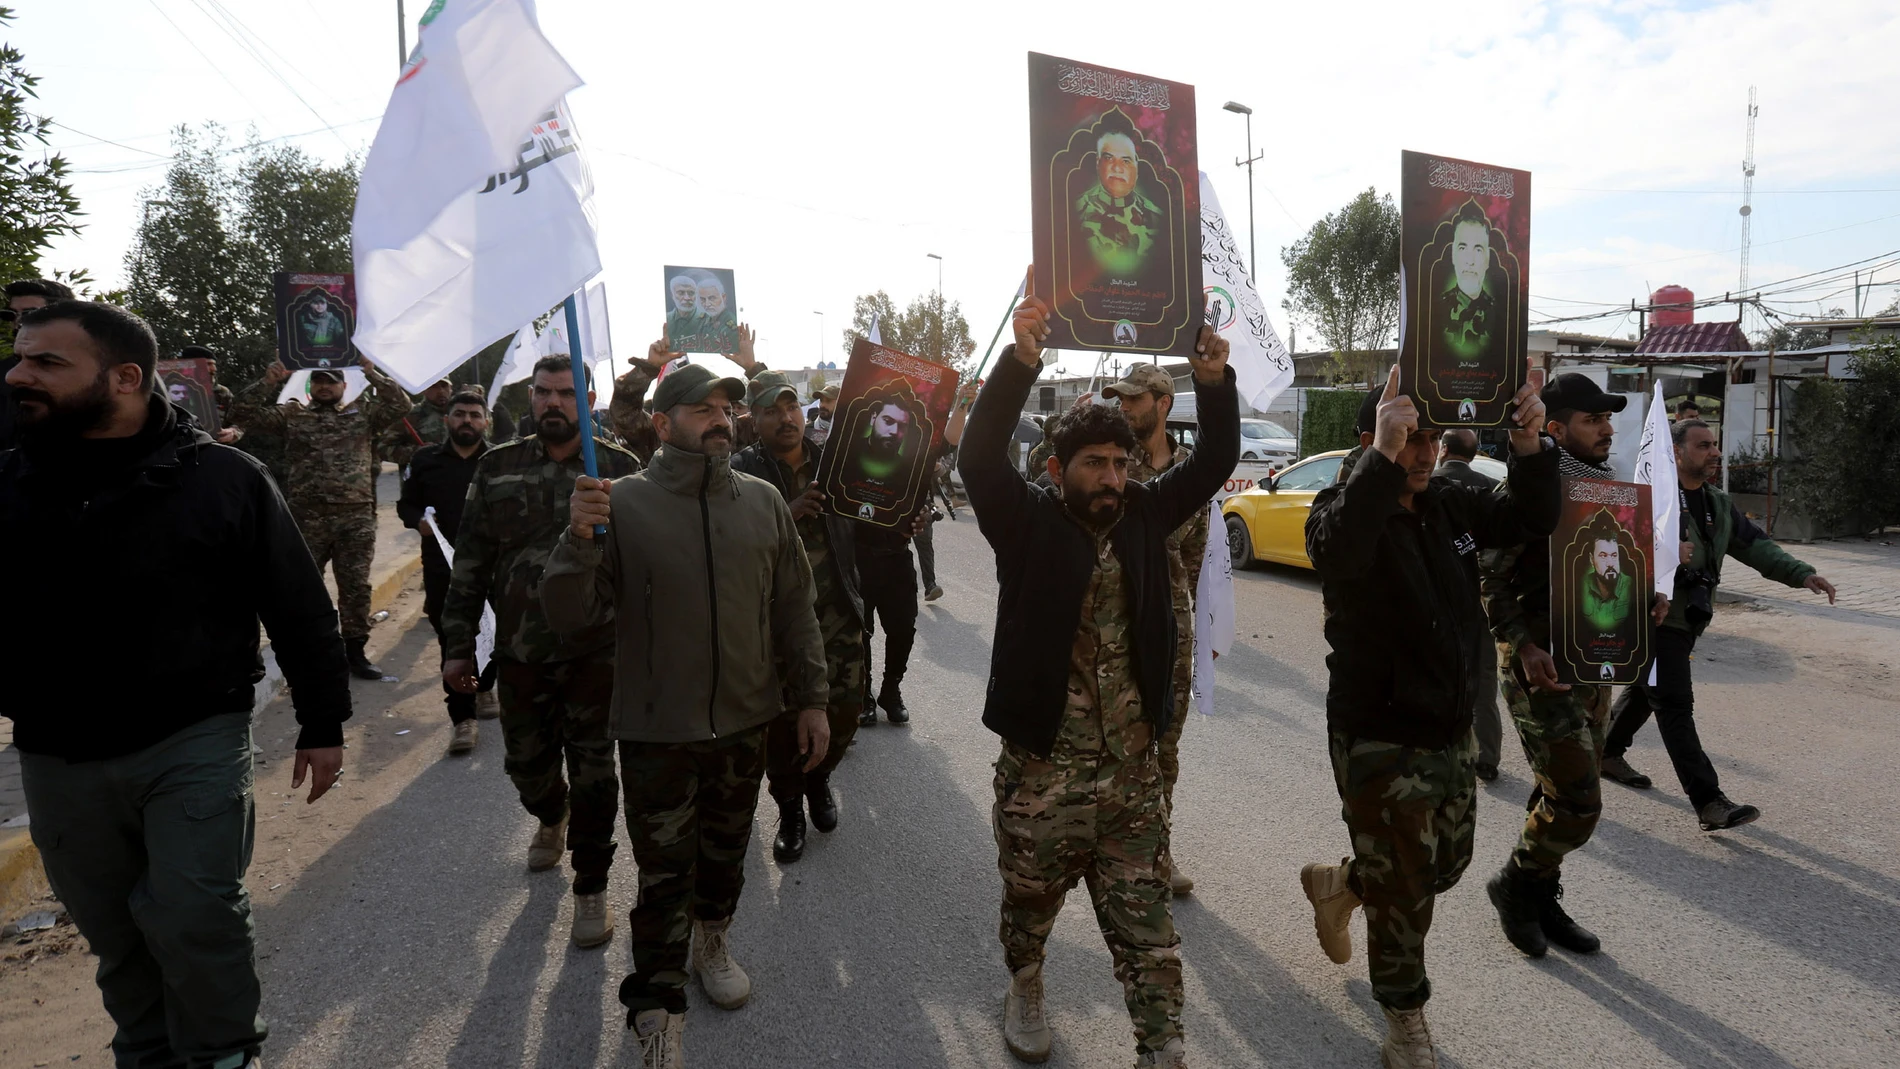 Baghdad (Iraq), 02/04/2024.- Members of the Iraqi Shiite Popular Mobilization Forces (PMF) carry images of their comrades, who were killed in recent US air strikes in western Iraq, during a funeral procession in Baghdad, Iraq, 04 February 2024. The United States Central Command (CENTCOM) said on 02 February it carried out airstrikes in Iraq and Syria on more than 85 targets against Iran's Islamic Revolutionary Guards Corps (IRGC) Quds Force and affiliated militia groups. The US attacks were i...